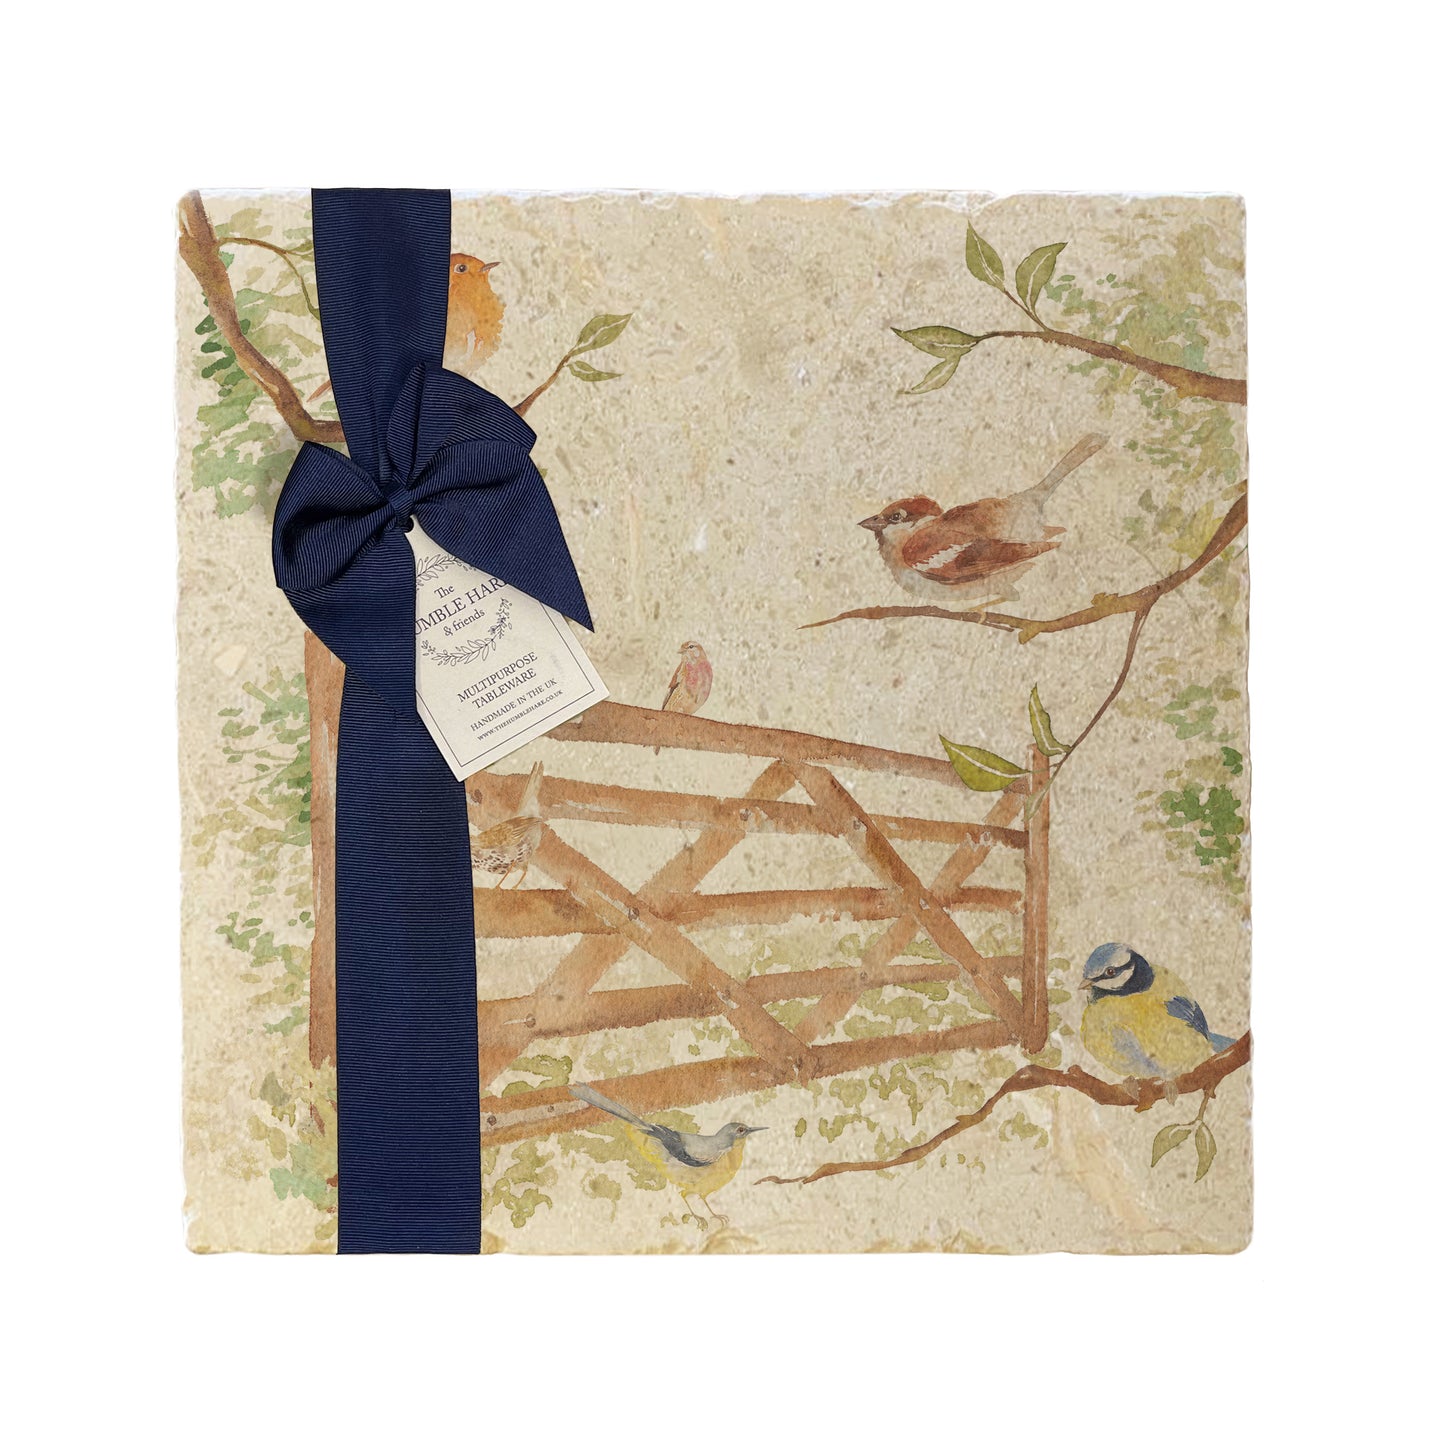 A multipurpose marble platter with a design featuring British garden birds in the hedgerow around the paddock gate, packaged with a luxurious dark blue bow and branded gift tag.